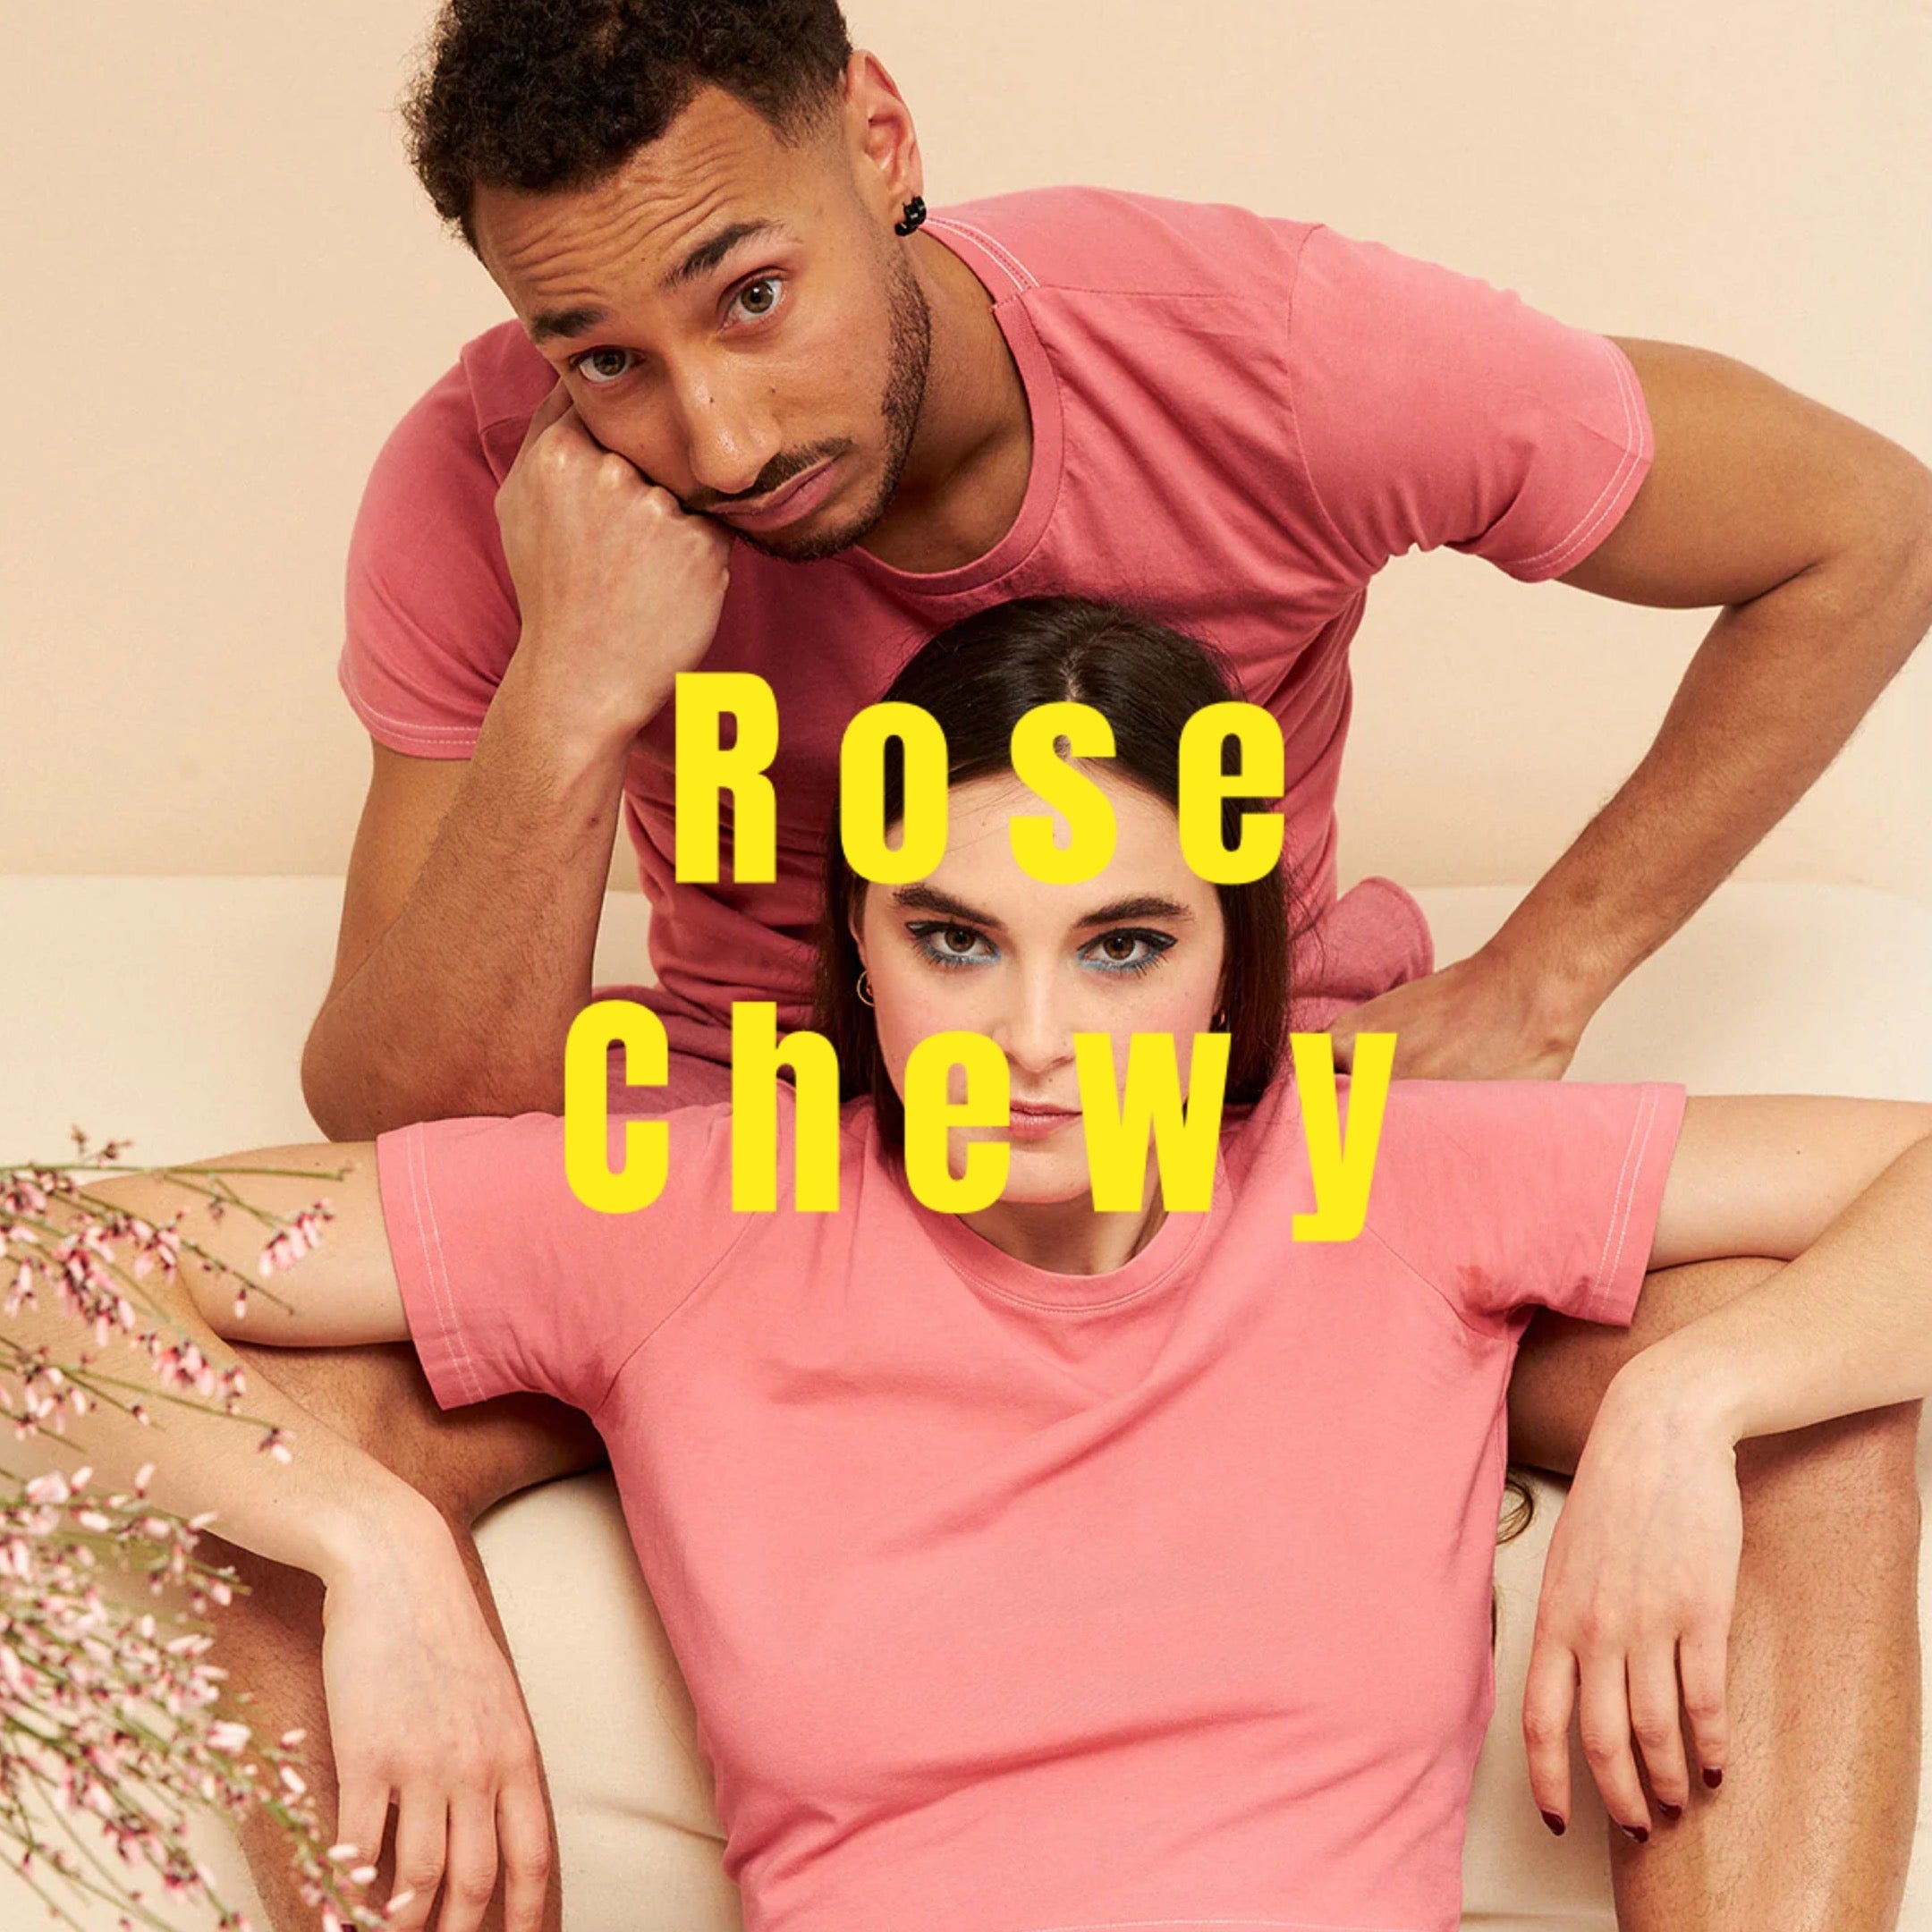 Rose chewy